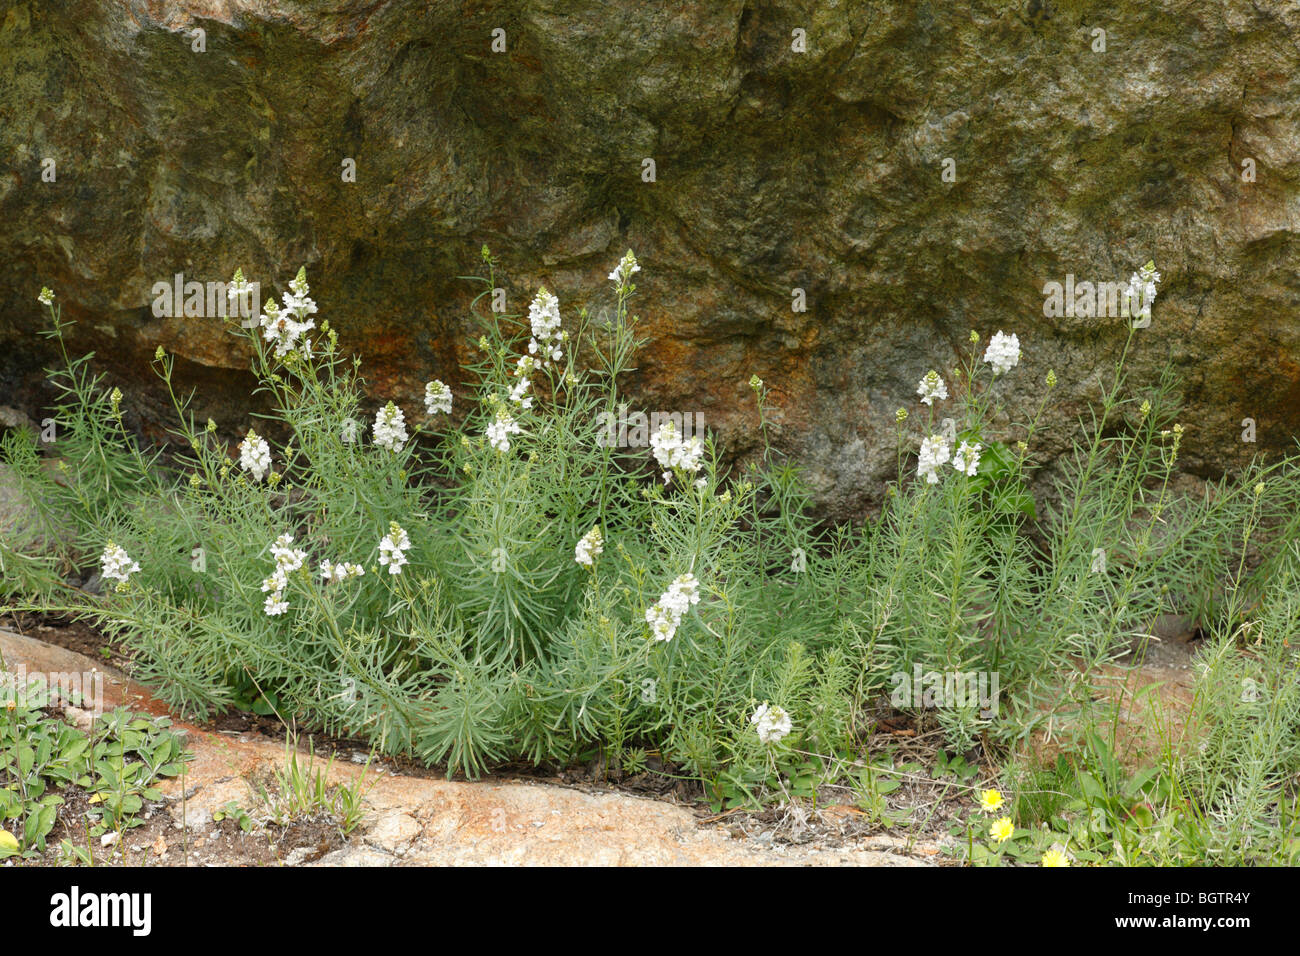 Pale Toadflax (Linaria repens) flowering in a rock crevice. Ariege Pyrenees, France. Stock Photo